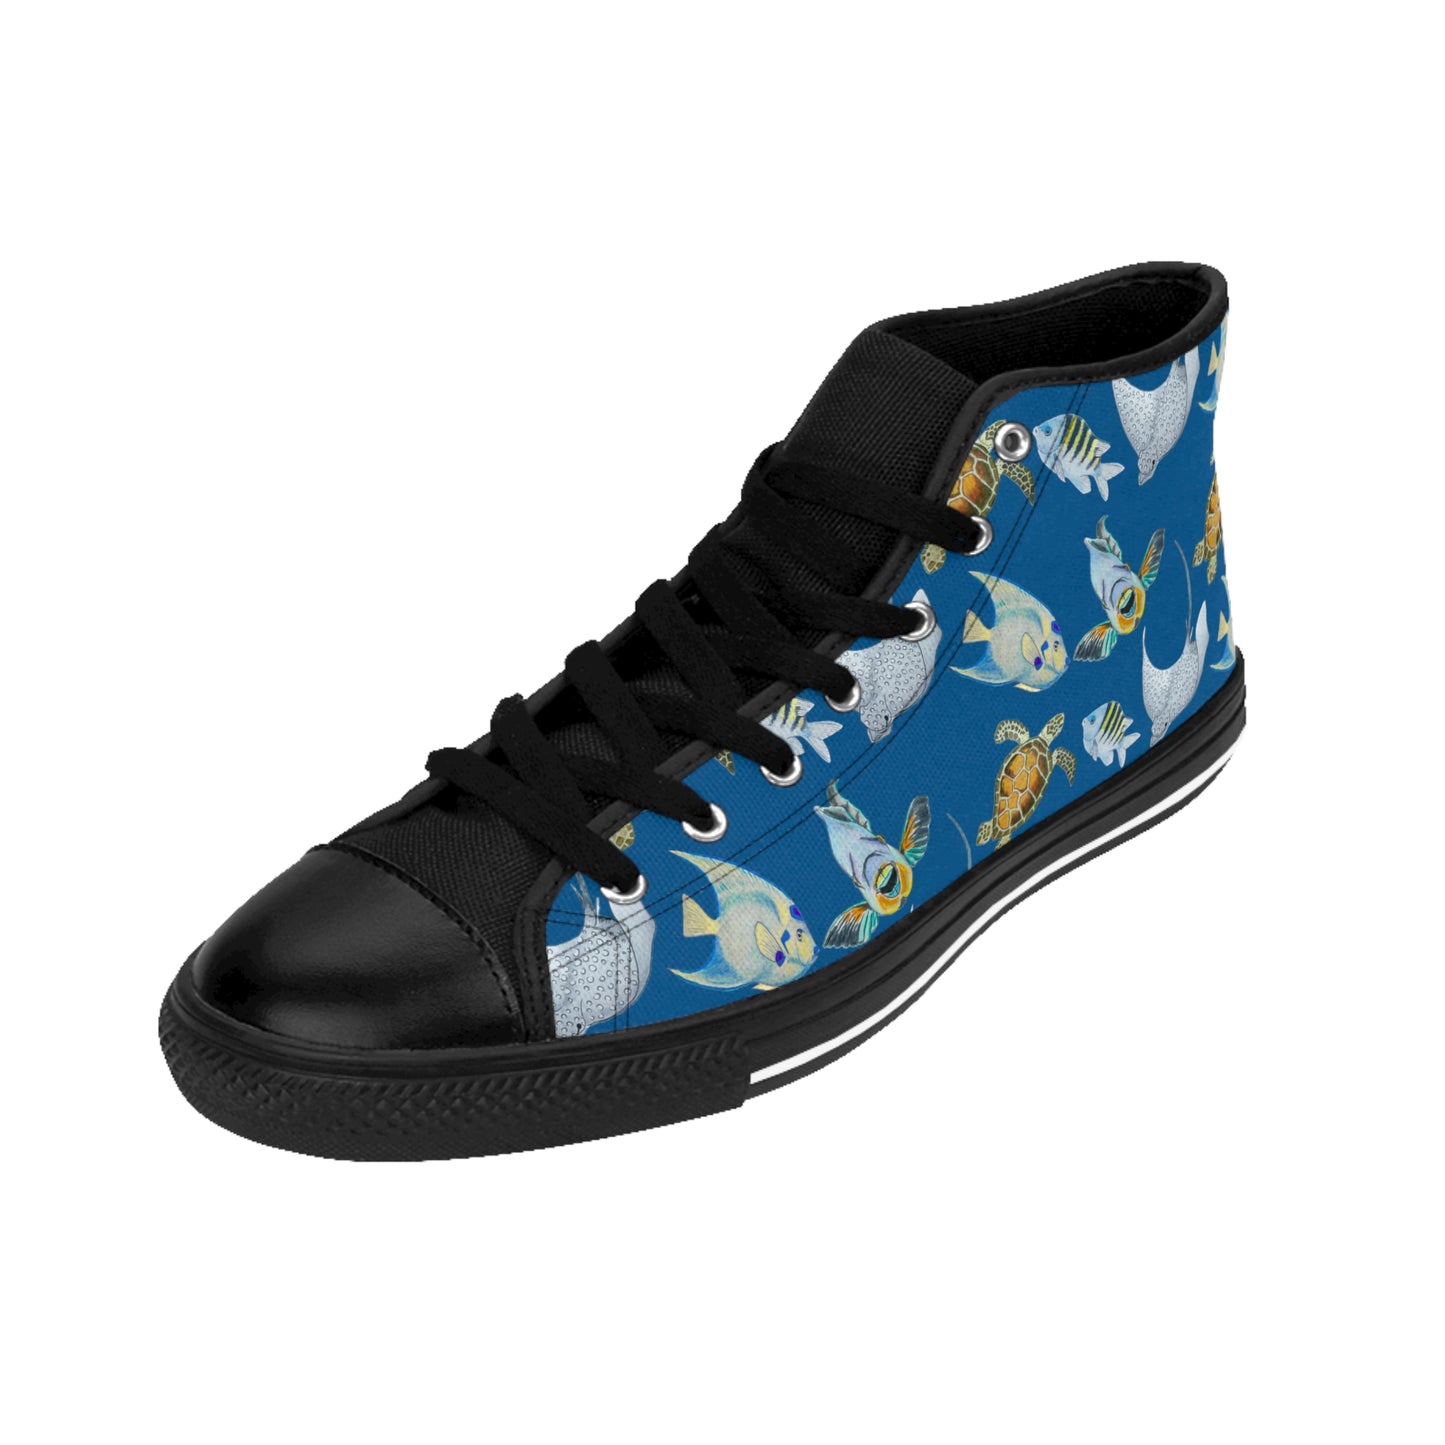 Sargasso Sea - Classic Sneakers - Pacific Blue